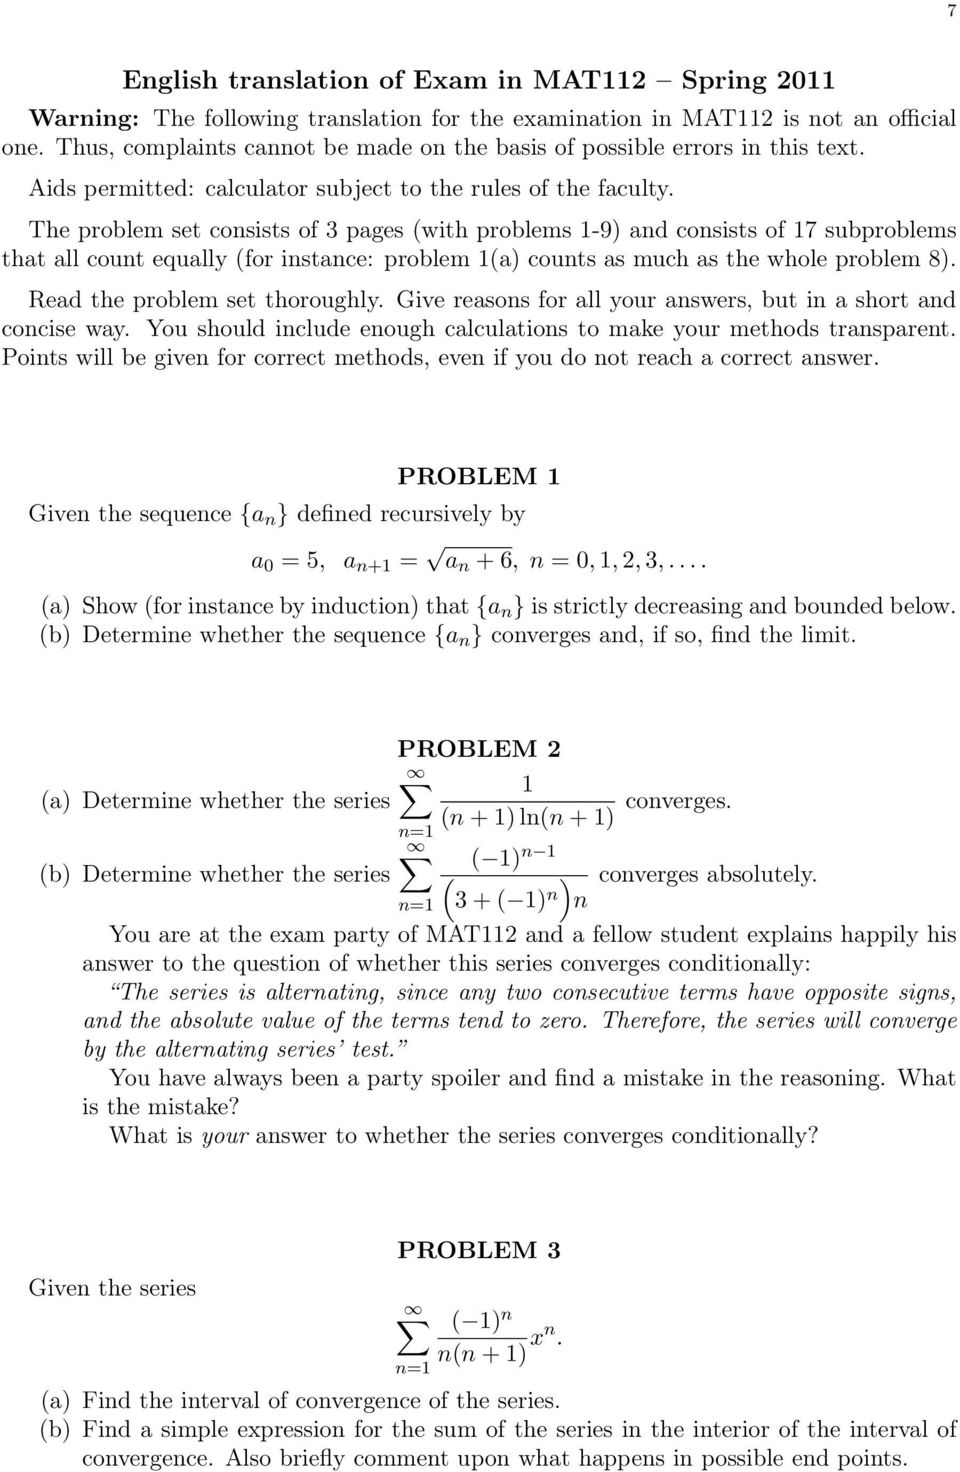 The problem set consists of 3 pages (with problems 1-9) and consists of 17 subproblems that all count equally (for instance: problem 1(a) counts as much as the whole problem 8).